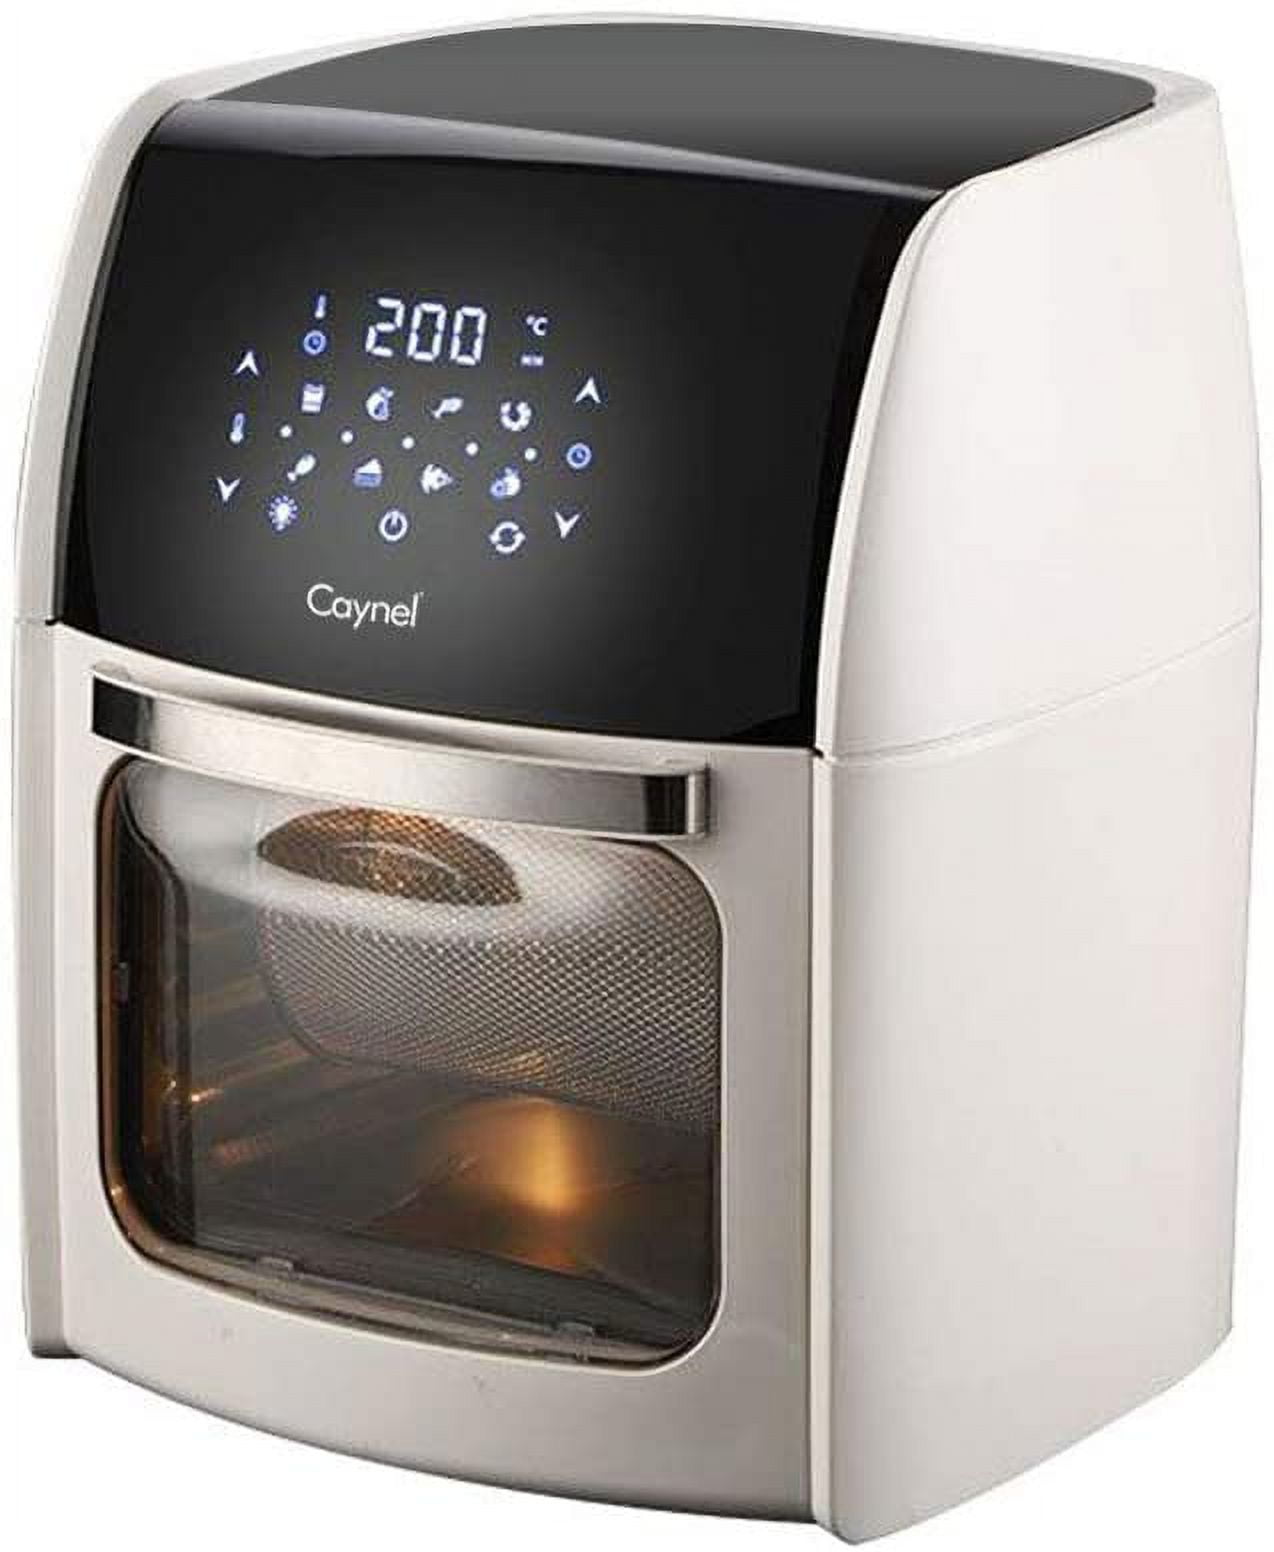  Caynel 12.7 Quart Digital Air Fryer with Rotisserie,  Dehydrator, Convection Oven, 8 Presets to Air Fry, Roast, Dehydrate, Bake &  More, Glass Viewing Window, Accessory Kit and Recipe Book Included, Large